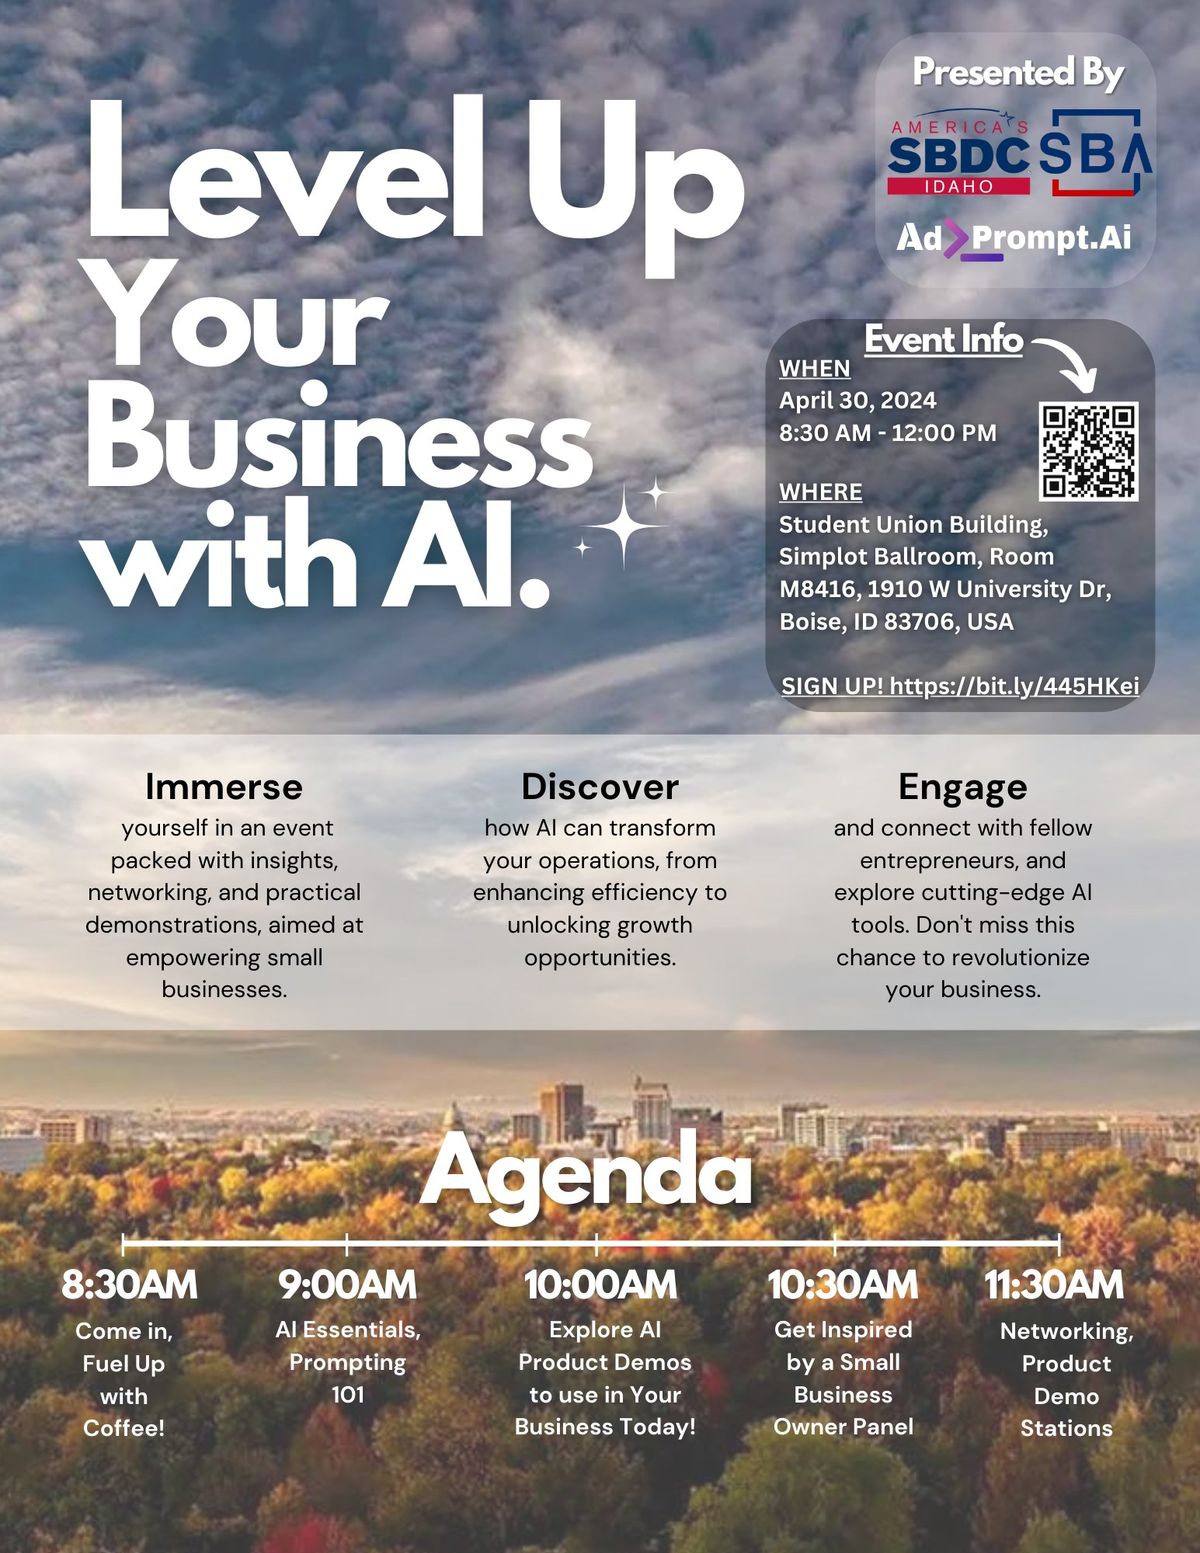 Level Up Your Business With AI